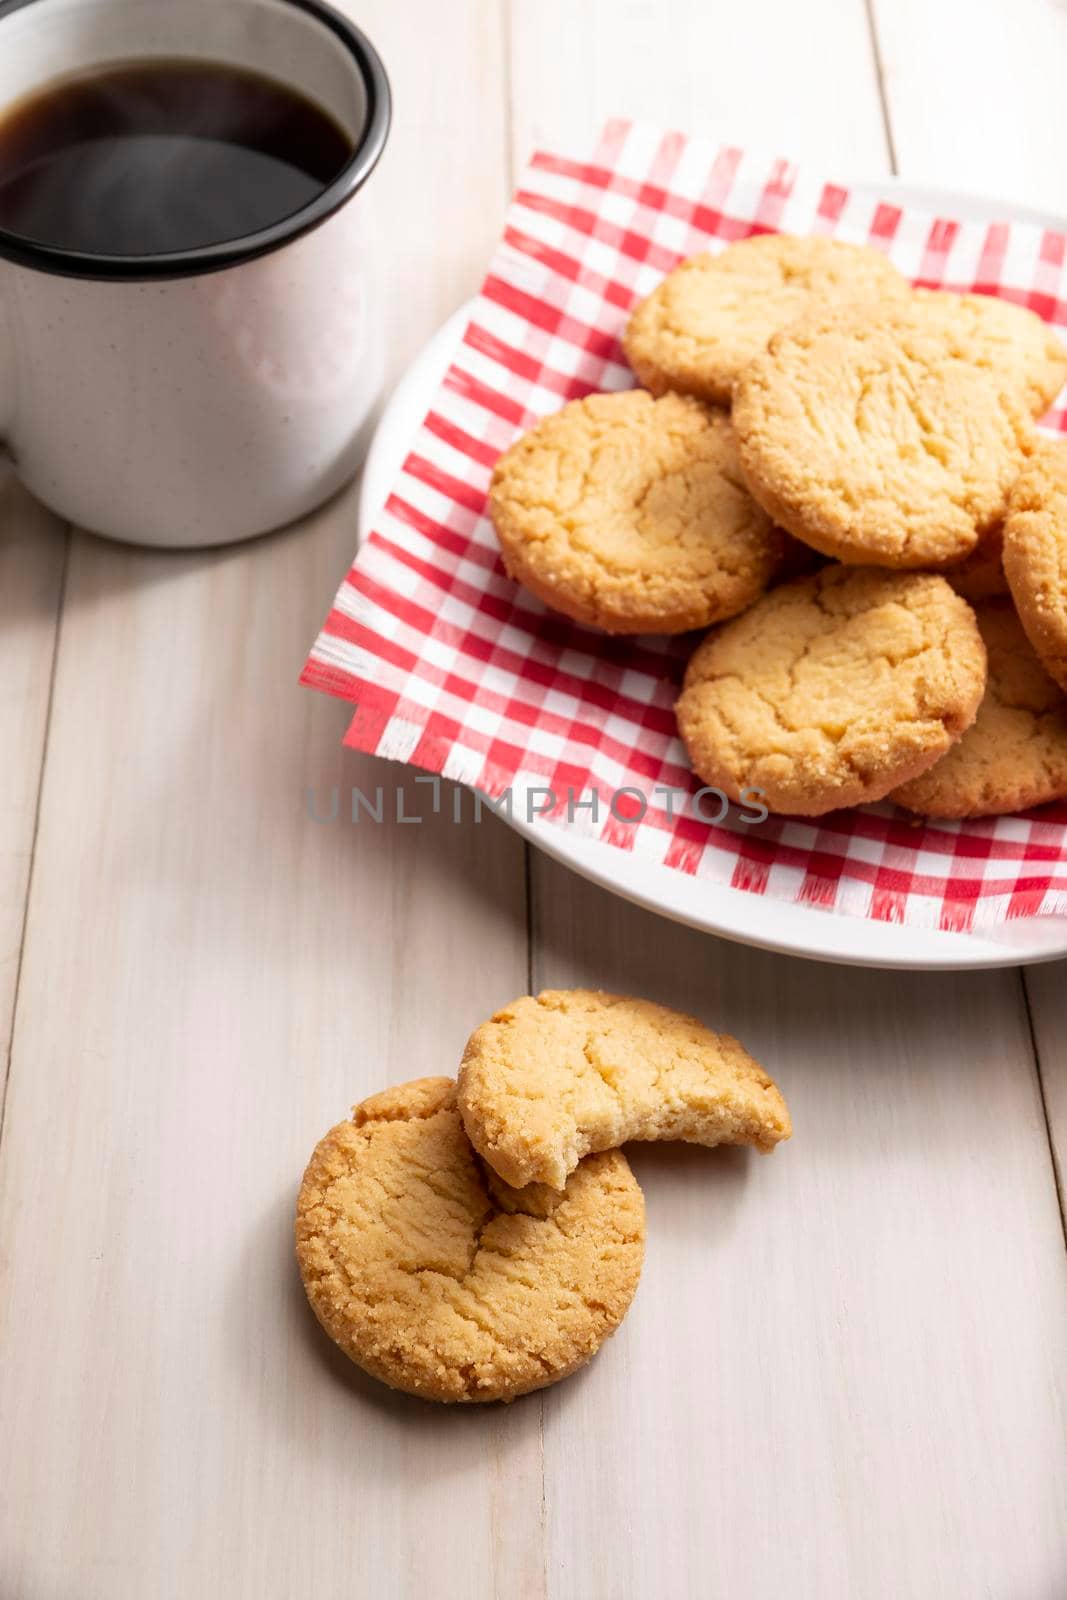 Homemade crunchy cookies by hayaship